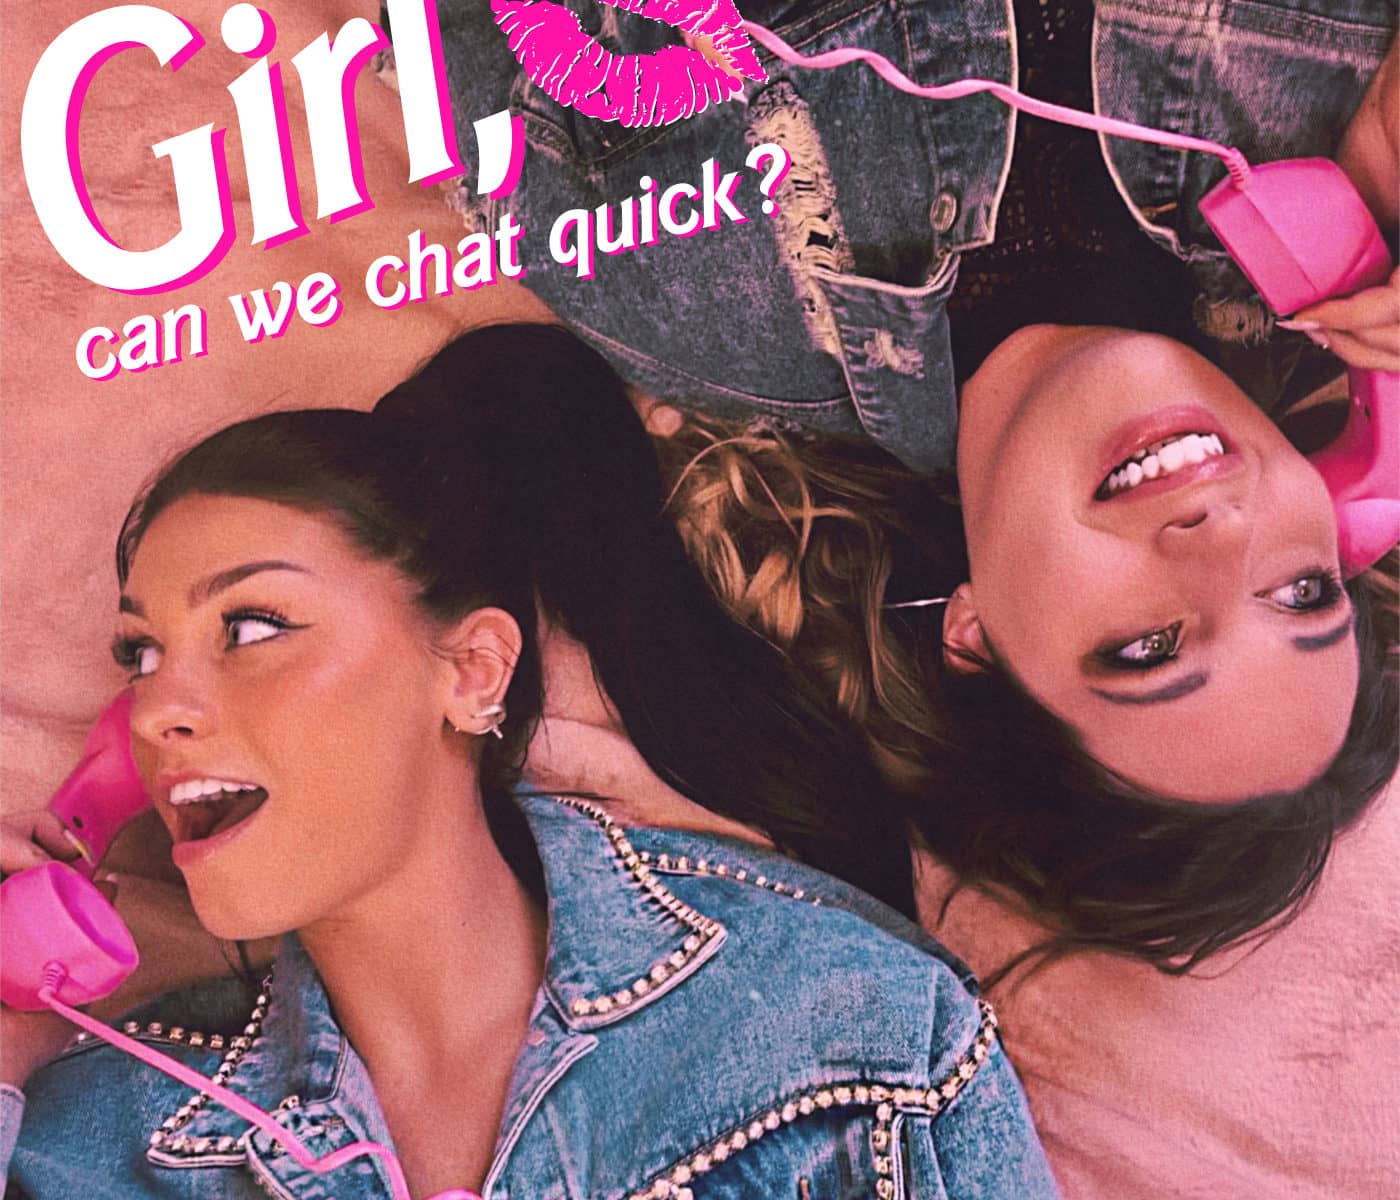 girl_can_we_chat_quick_podcast-14